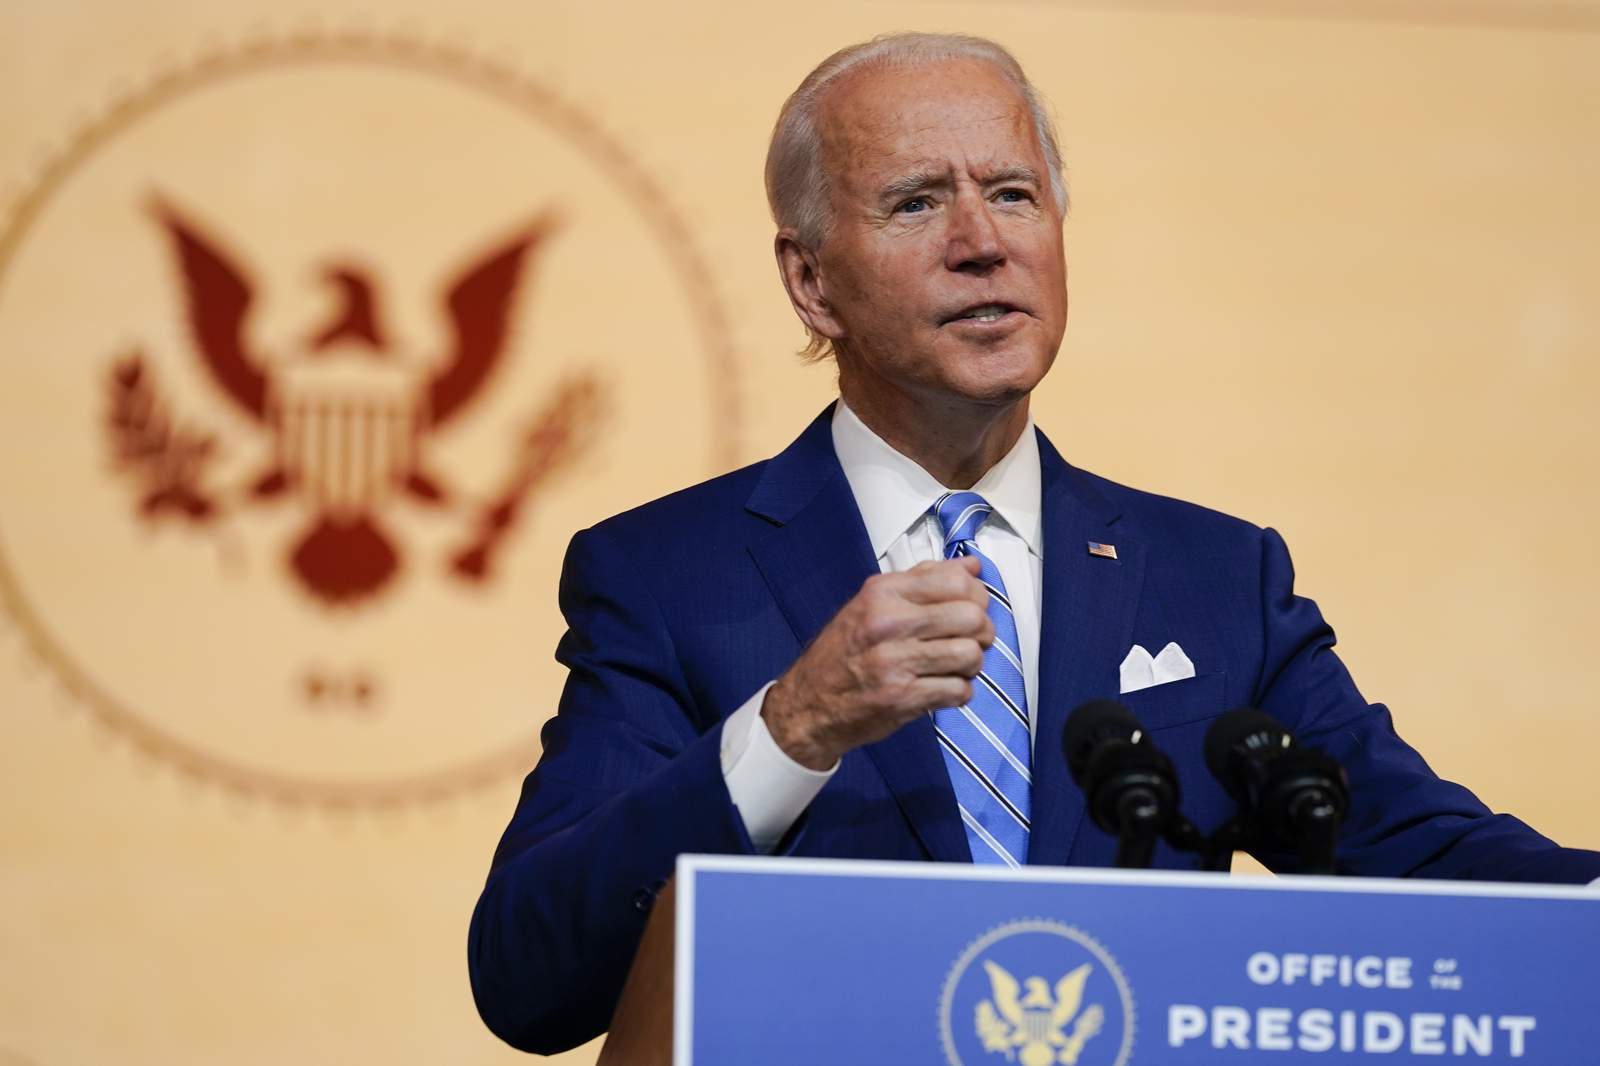 Biden seeks unity as Trump stokes fading embers of campaign